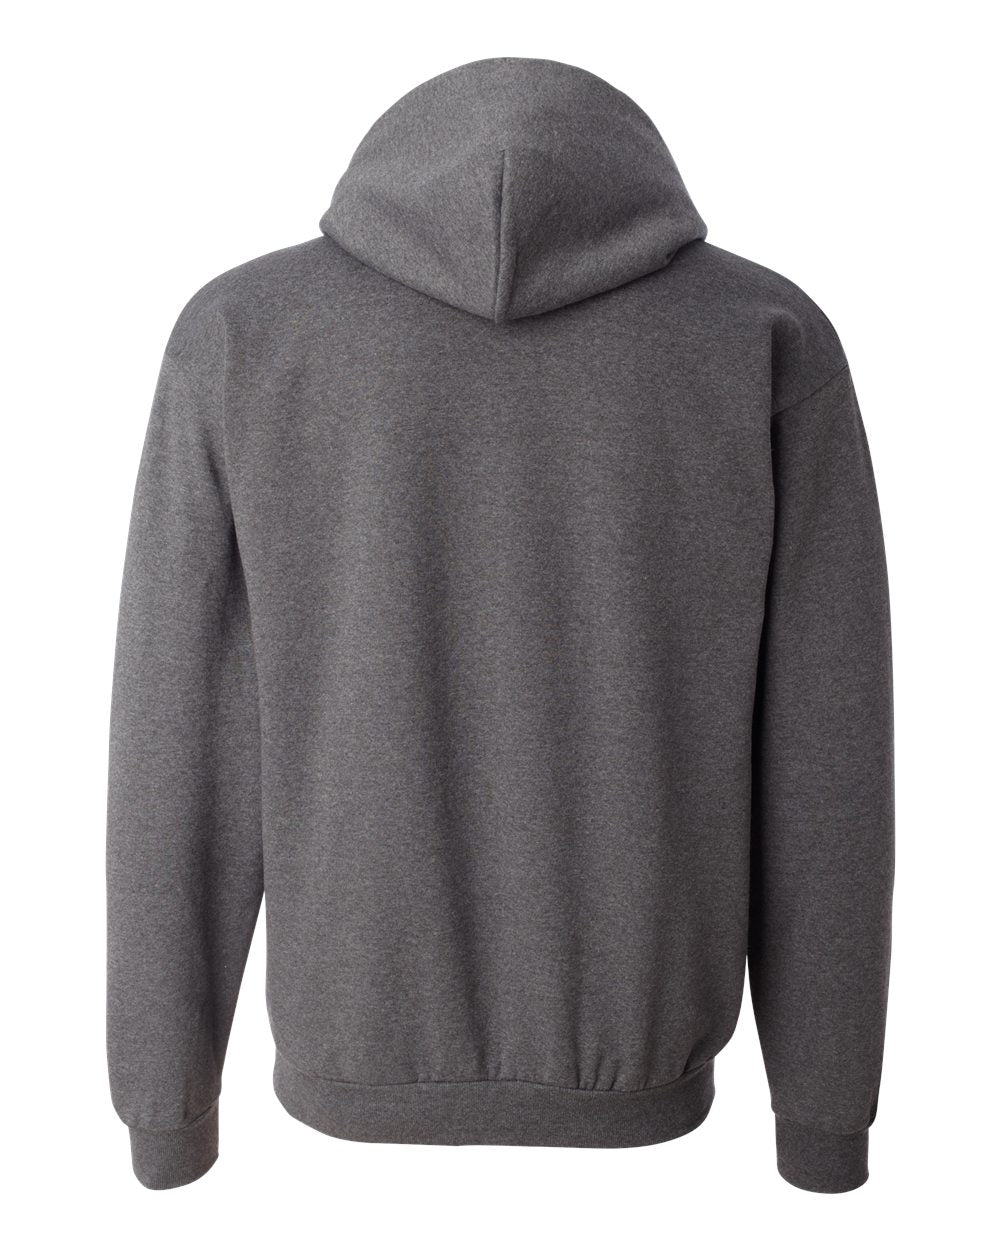 Champion Powerblend® Hooded Sweatshirt S700 #color_Charcoal Heather